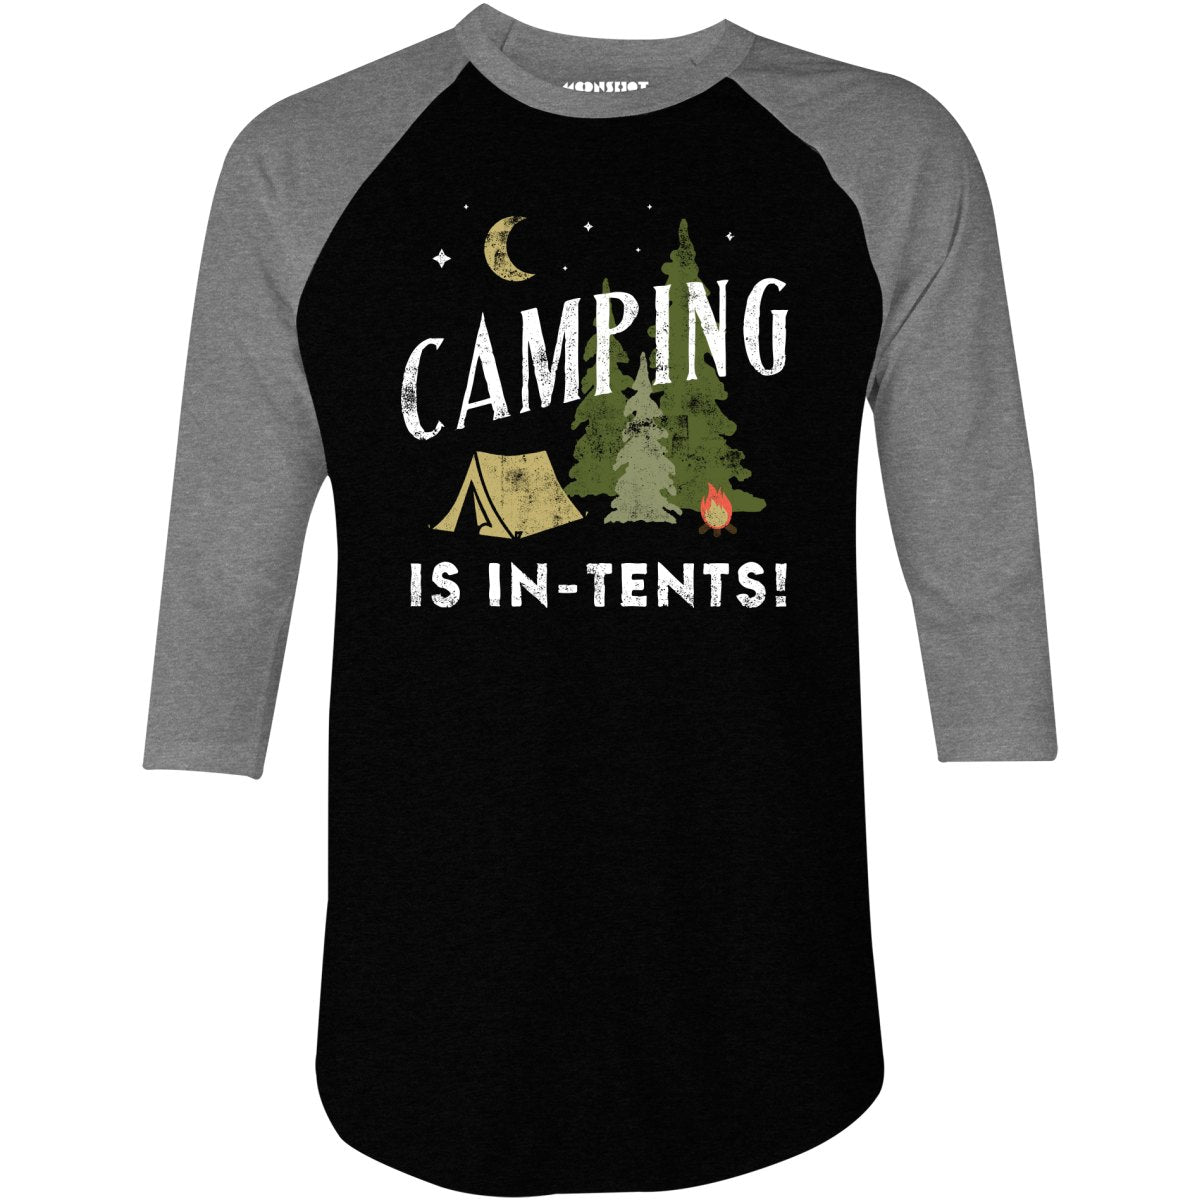 Camping is In-Tents - 3/4 Sleeve Raglan T-Shirt